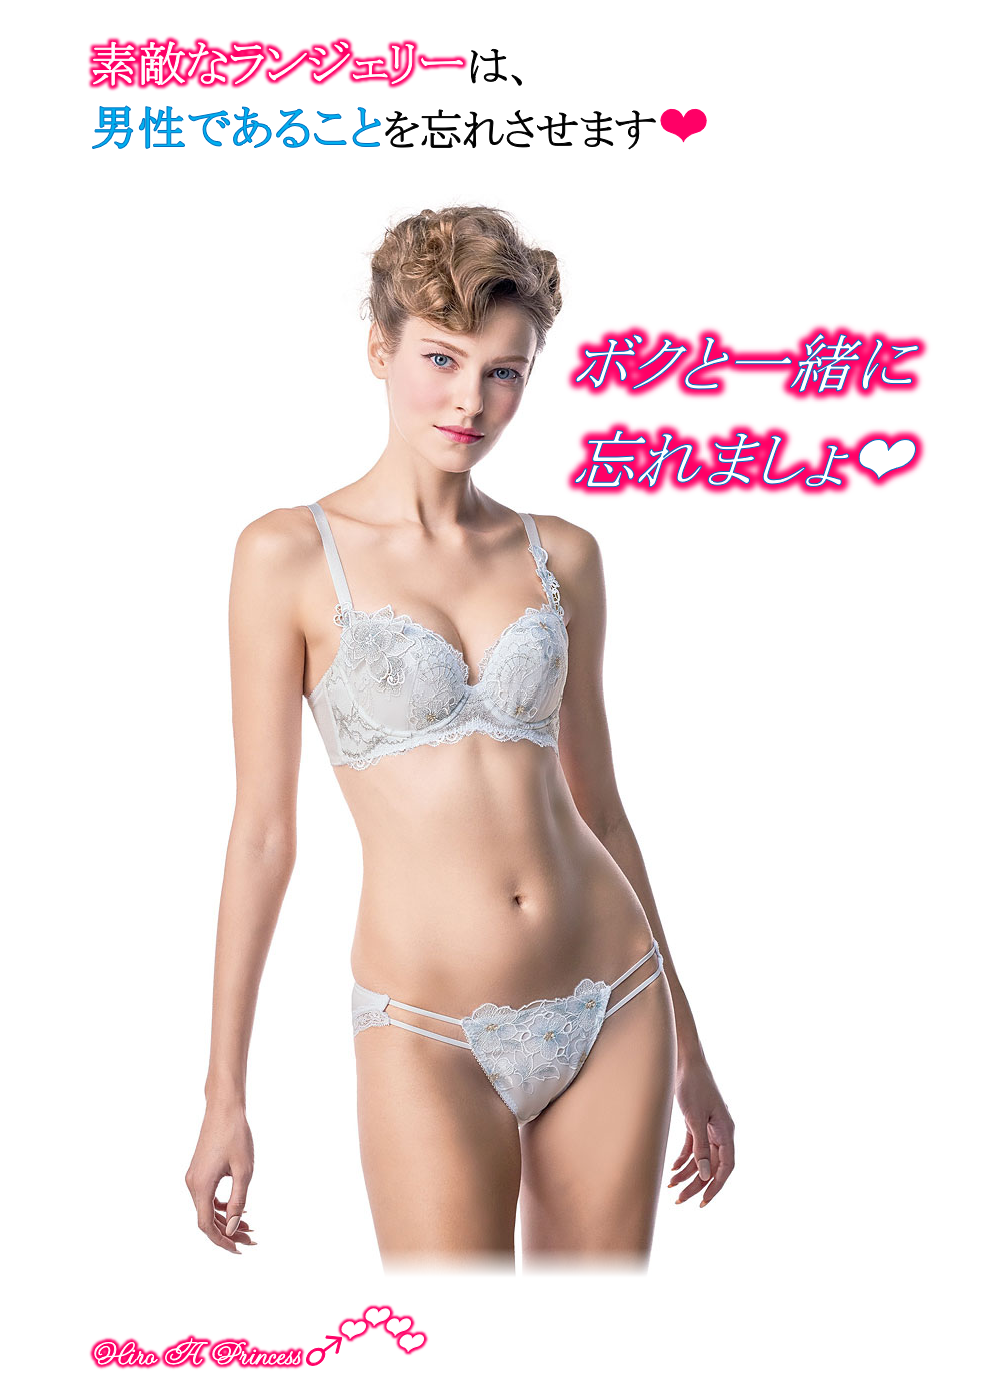 Beautiful Lingerie makes you forget you are a Male J